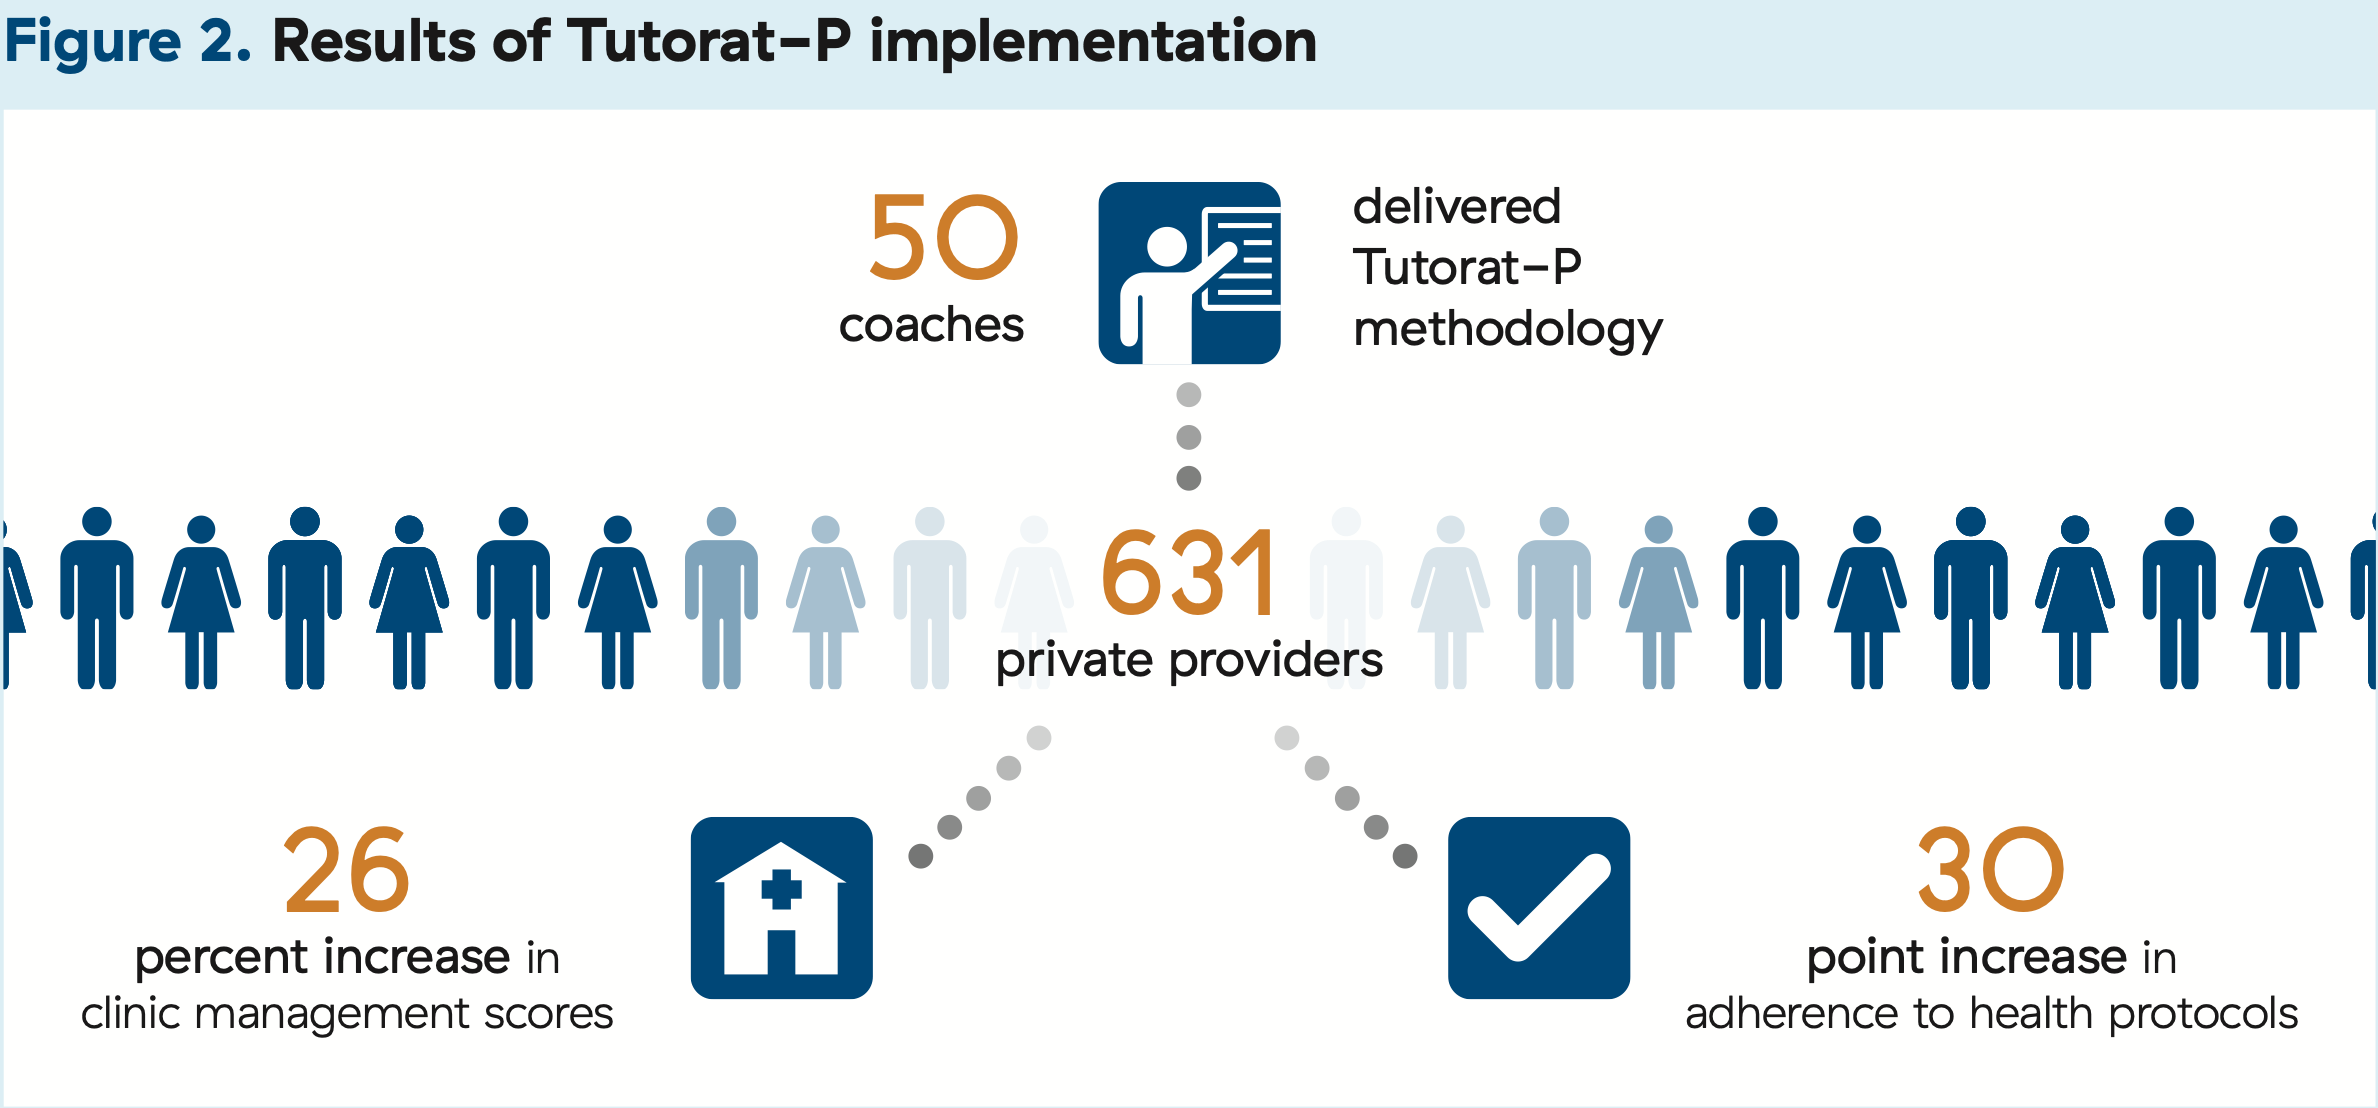 A process diagram depicts 3 levels. The top level shows 50 coaches delivering the Tutorat-P methodology. The next level down shows 631 private providers. This level branches into two graphics in the bottom level. The left graphic shows a 26% increase in clinic management scores. The right graphic shows a 30-point increase in adherence to health protocols.